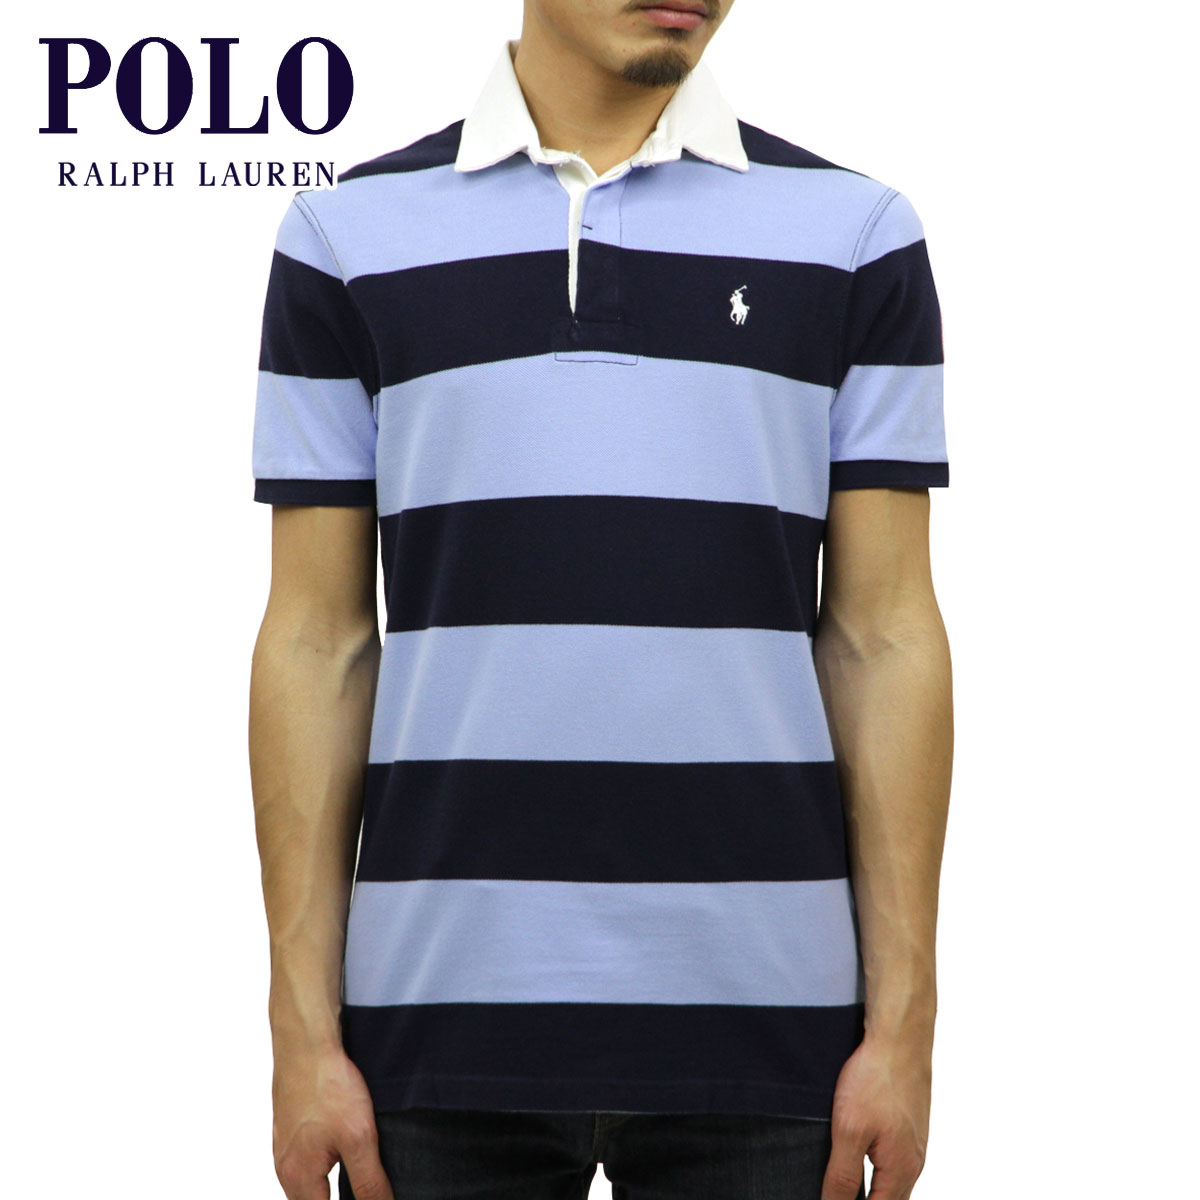 ݥ ե ݥ  POLO RALPH LAUREN Ⱦµݥ 饬ݥ STRIPED COTTON RUGBY POLO SHIRT